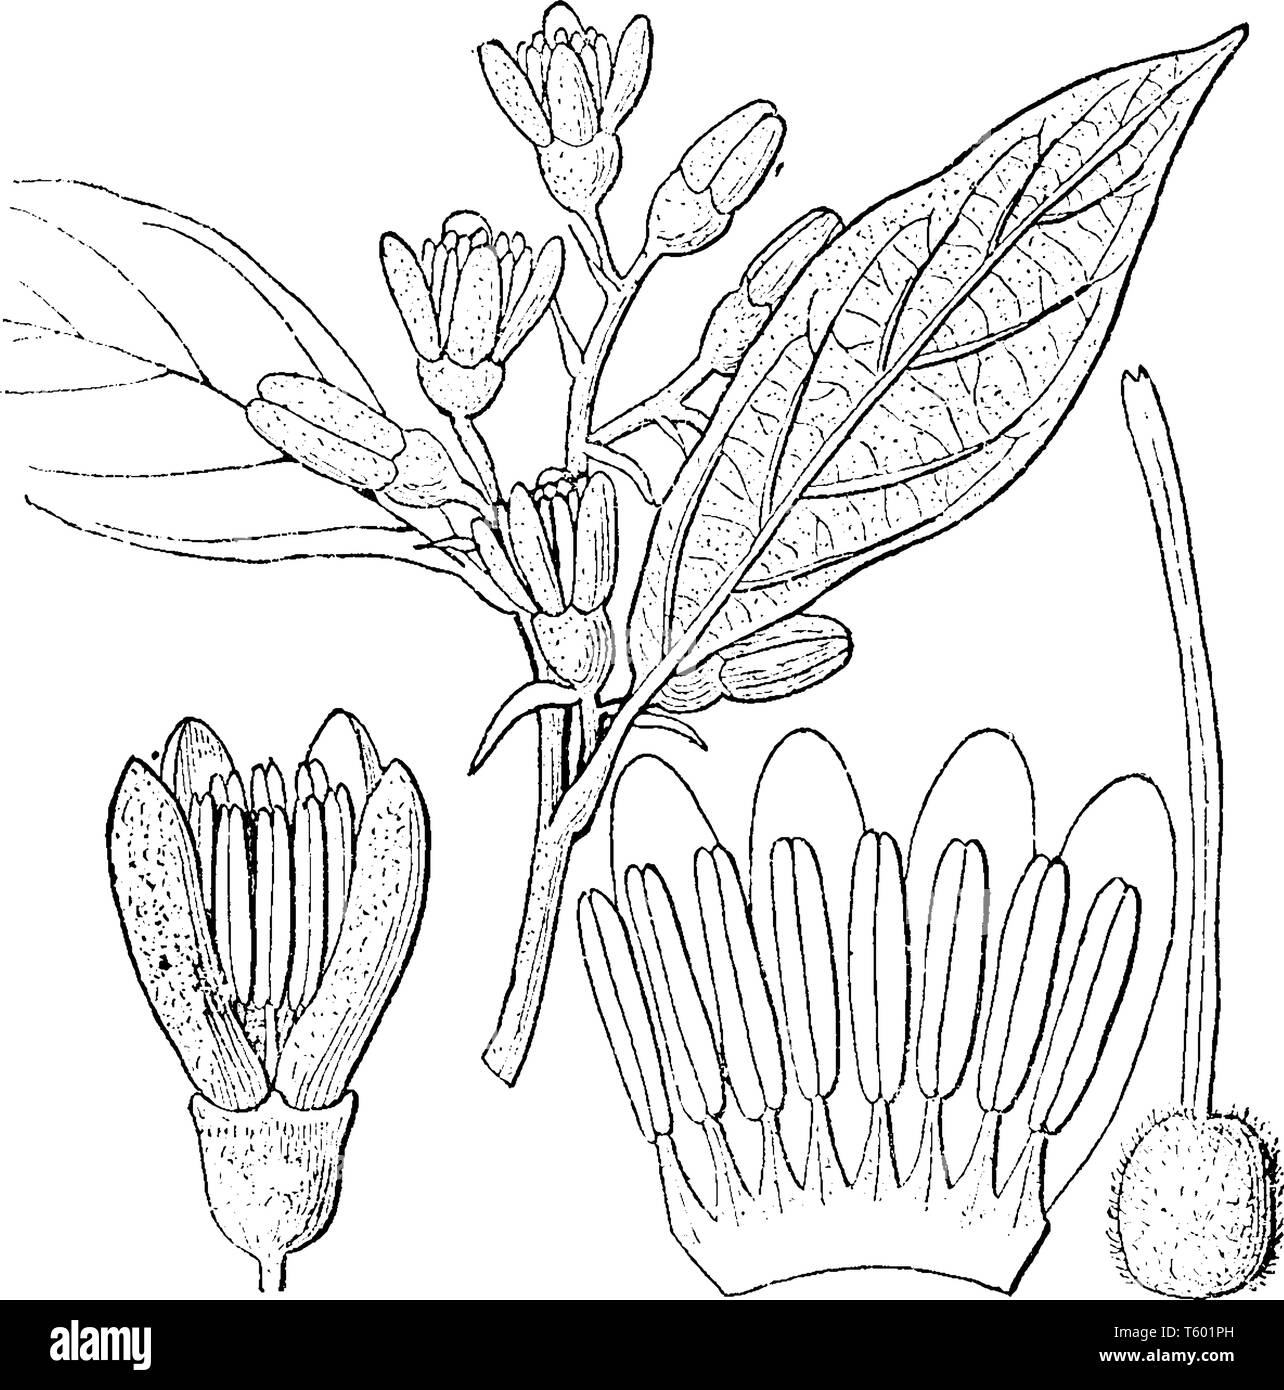 A picture showing the different parts of Styrax suberifolium tree. The parts includes a flower, corolla, stamens & pistil, vintage line drawing or eng Stock Vector